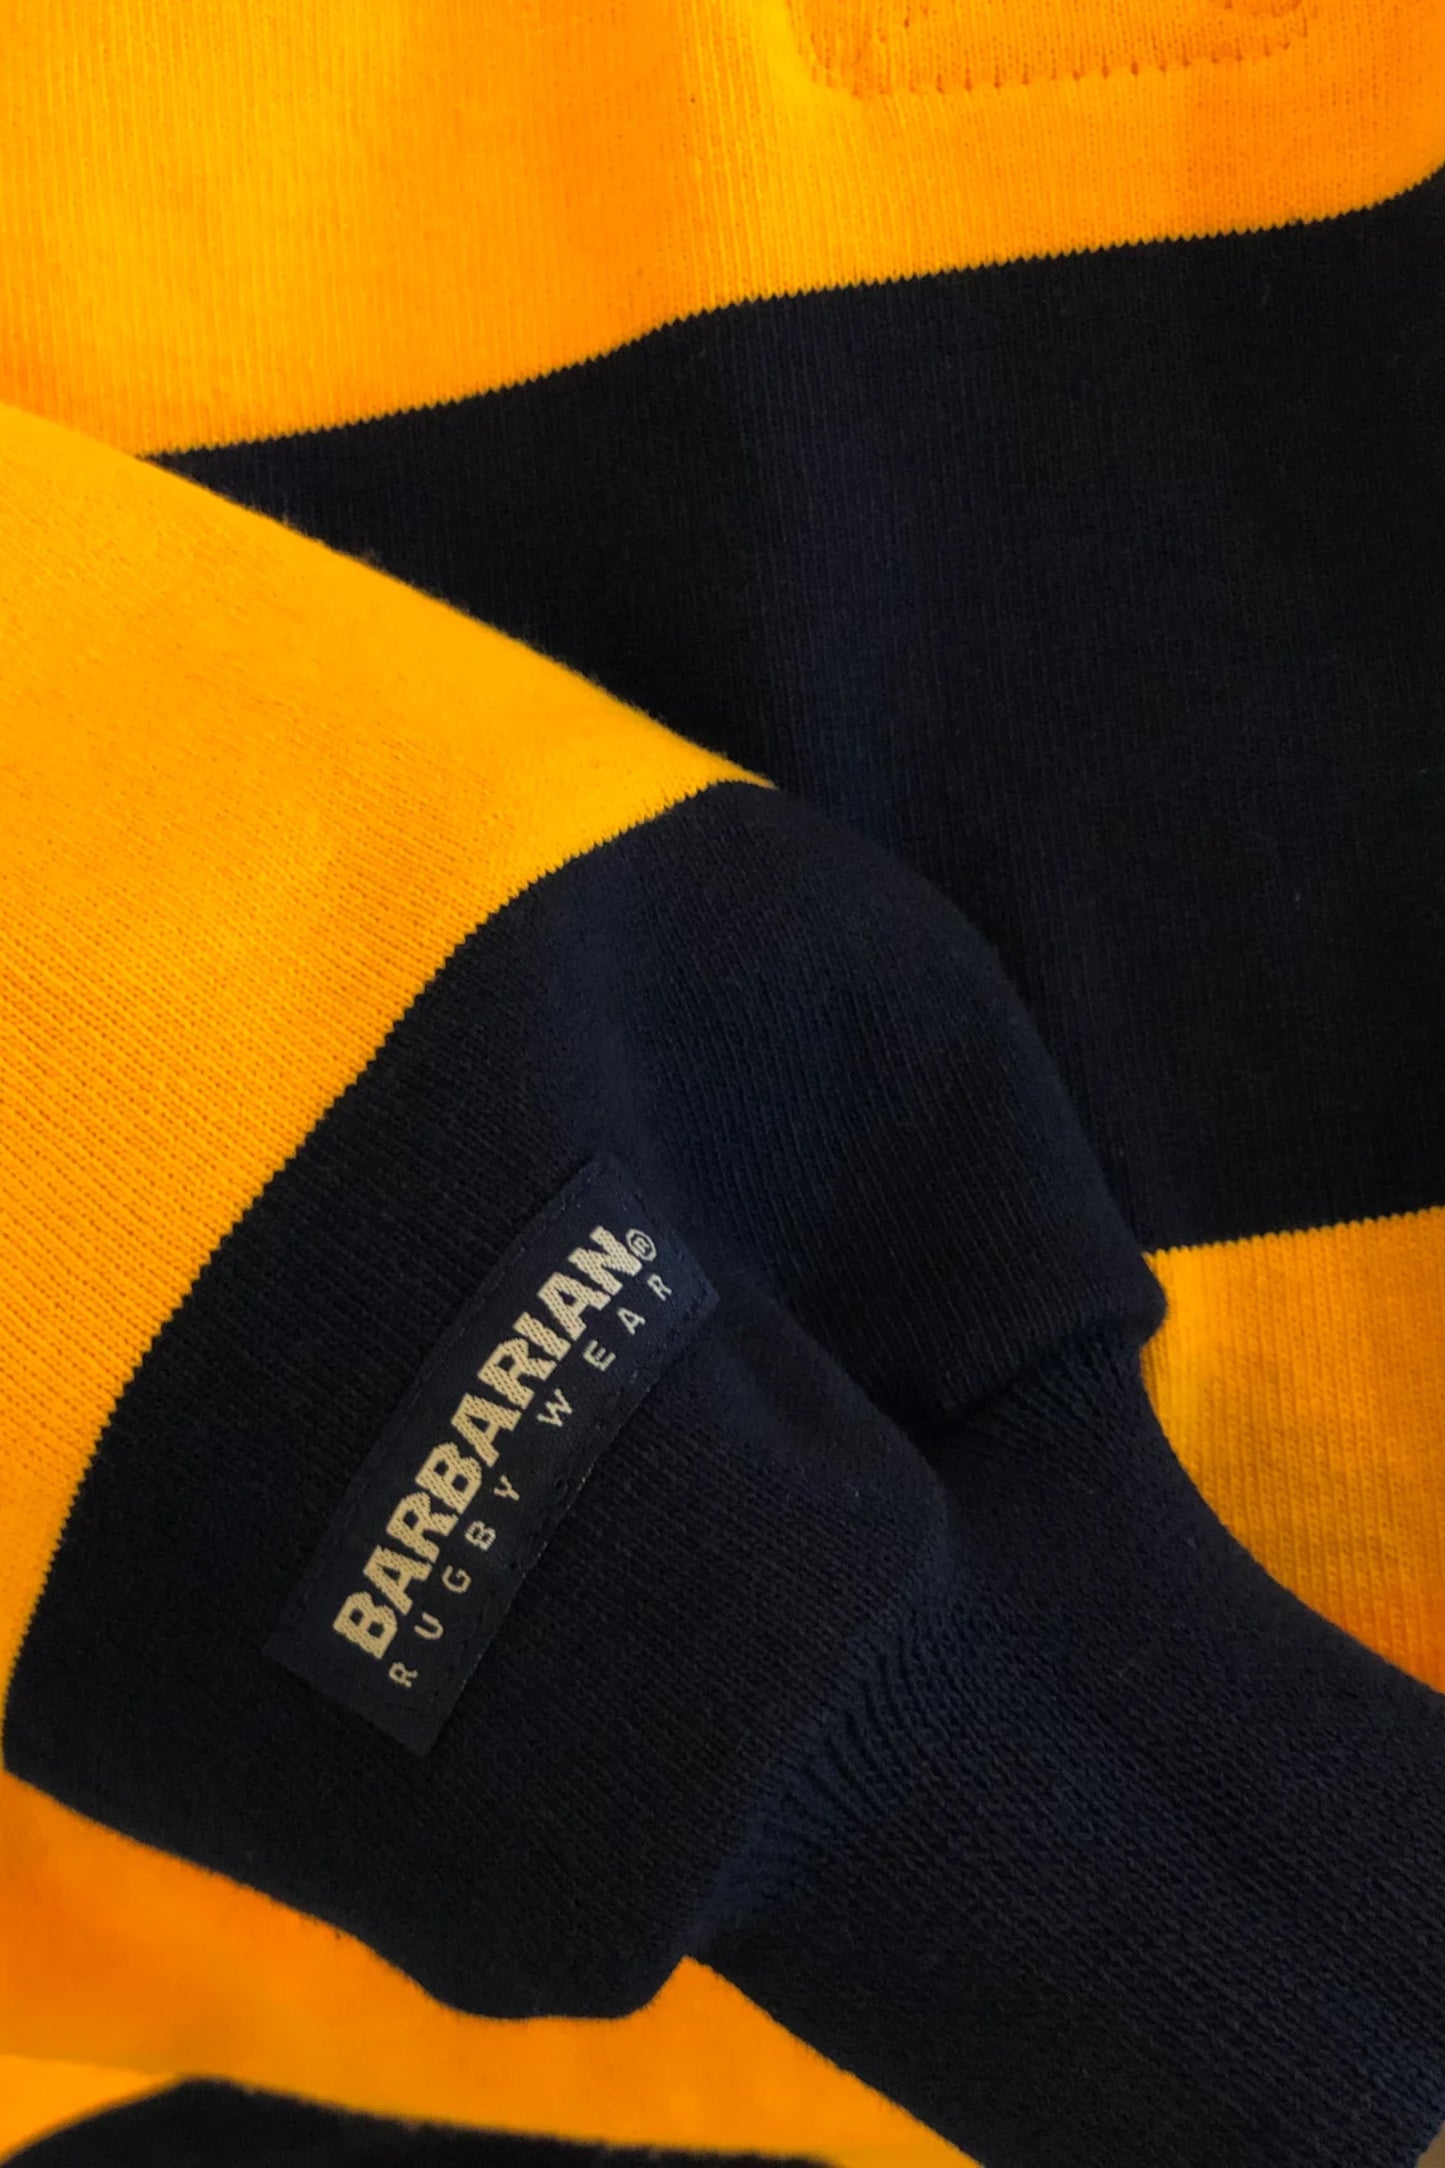 Barbarian - Rugby Shirt 4 Inch Stripe (Navy / Gold)